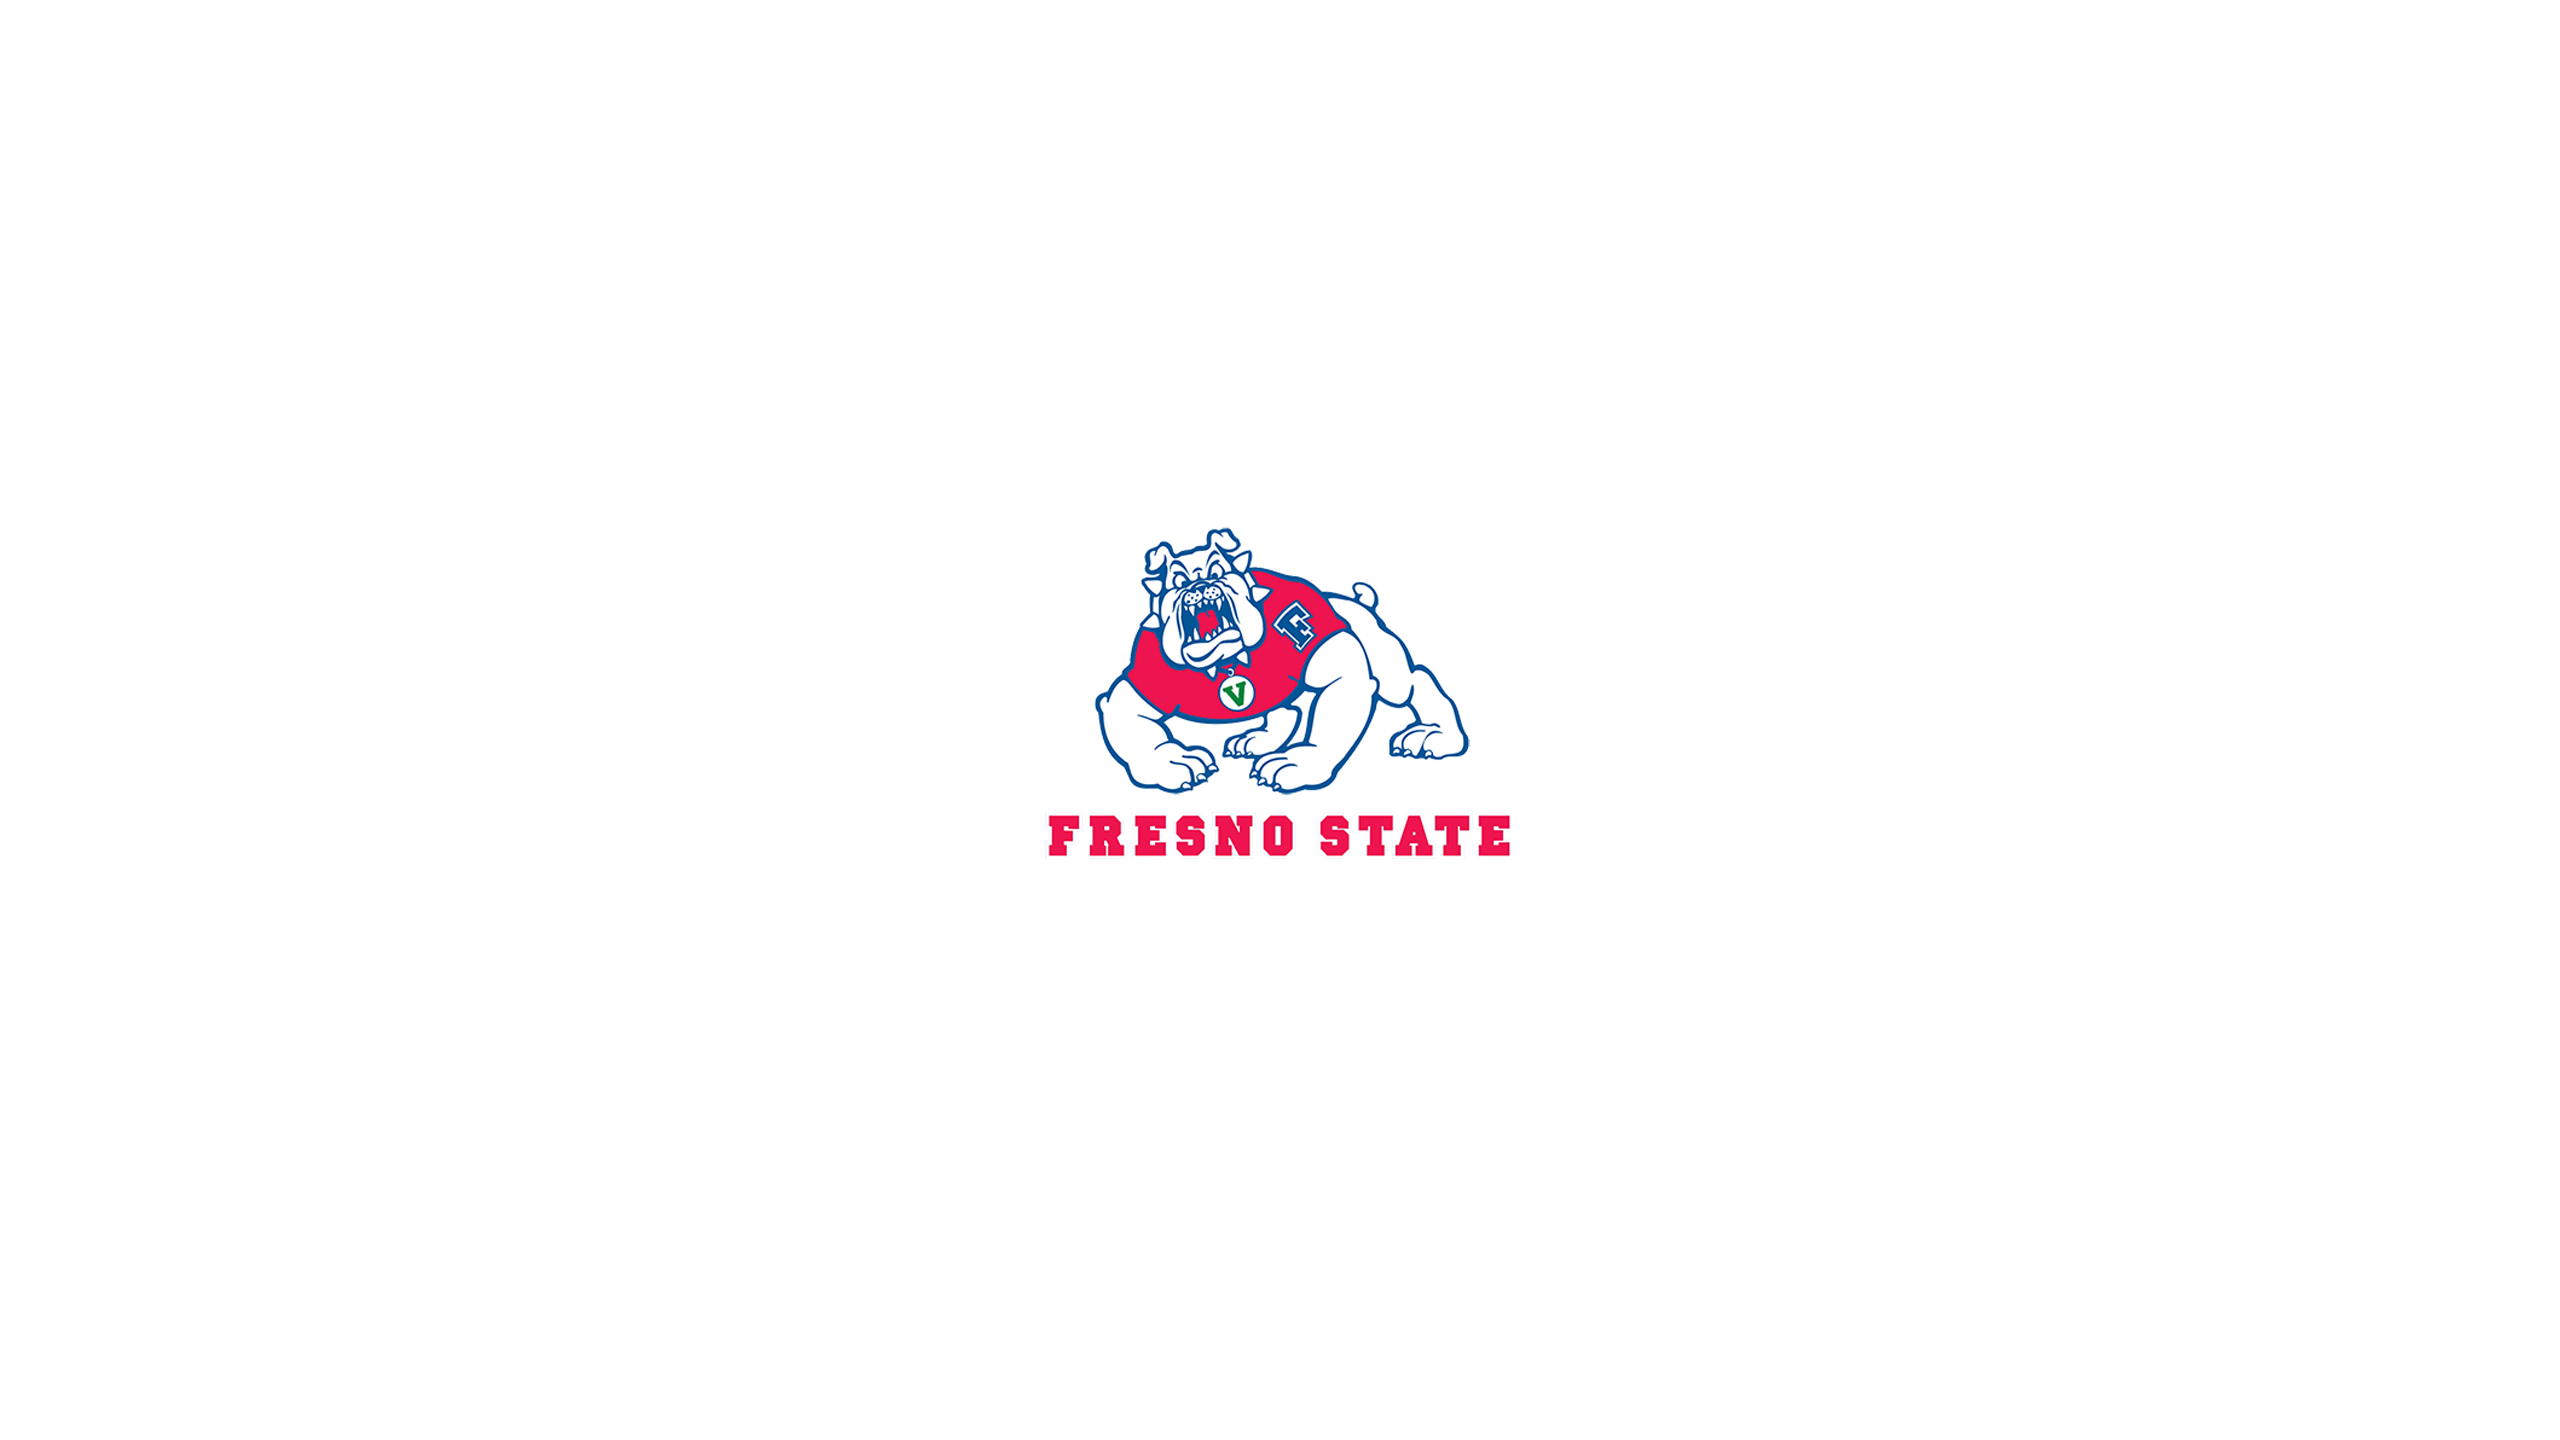 Fresno State Bulldogs Basketball - NCAAB - Square Bettor